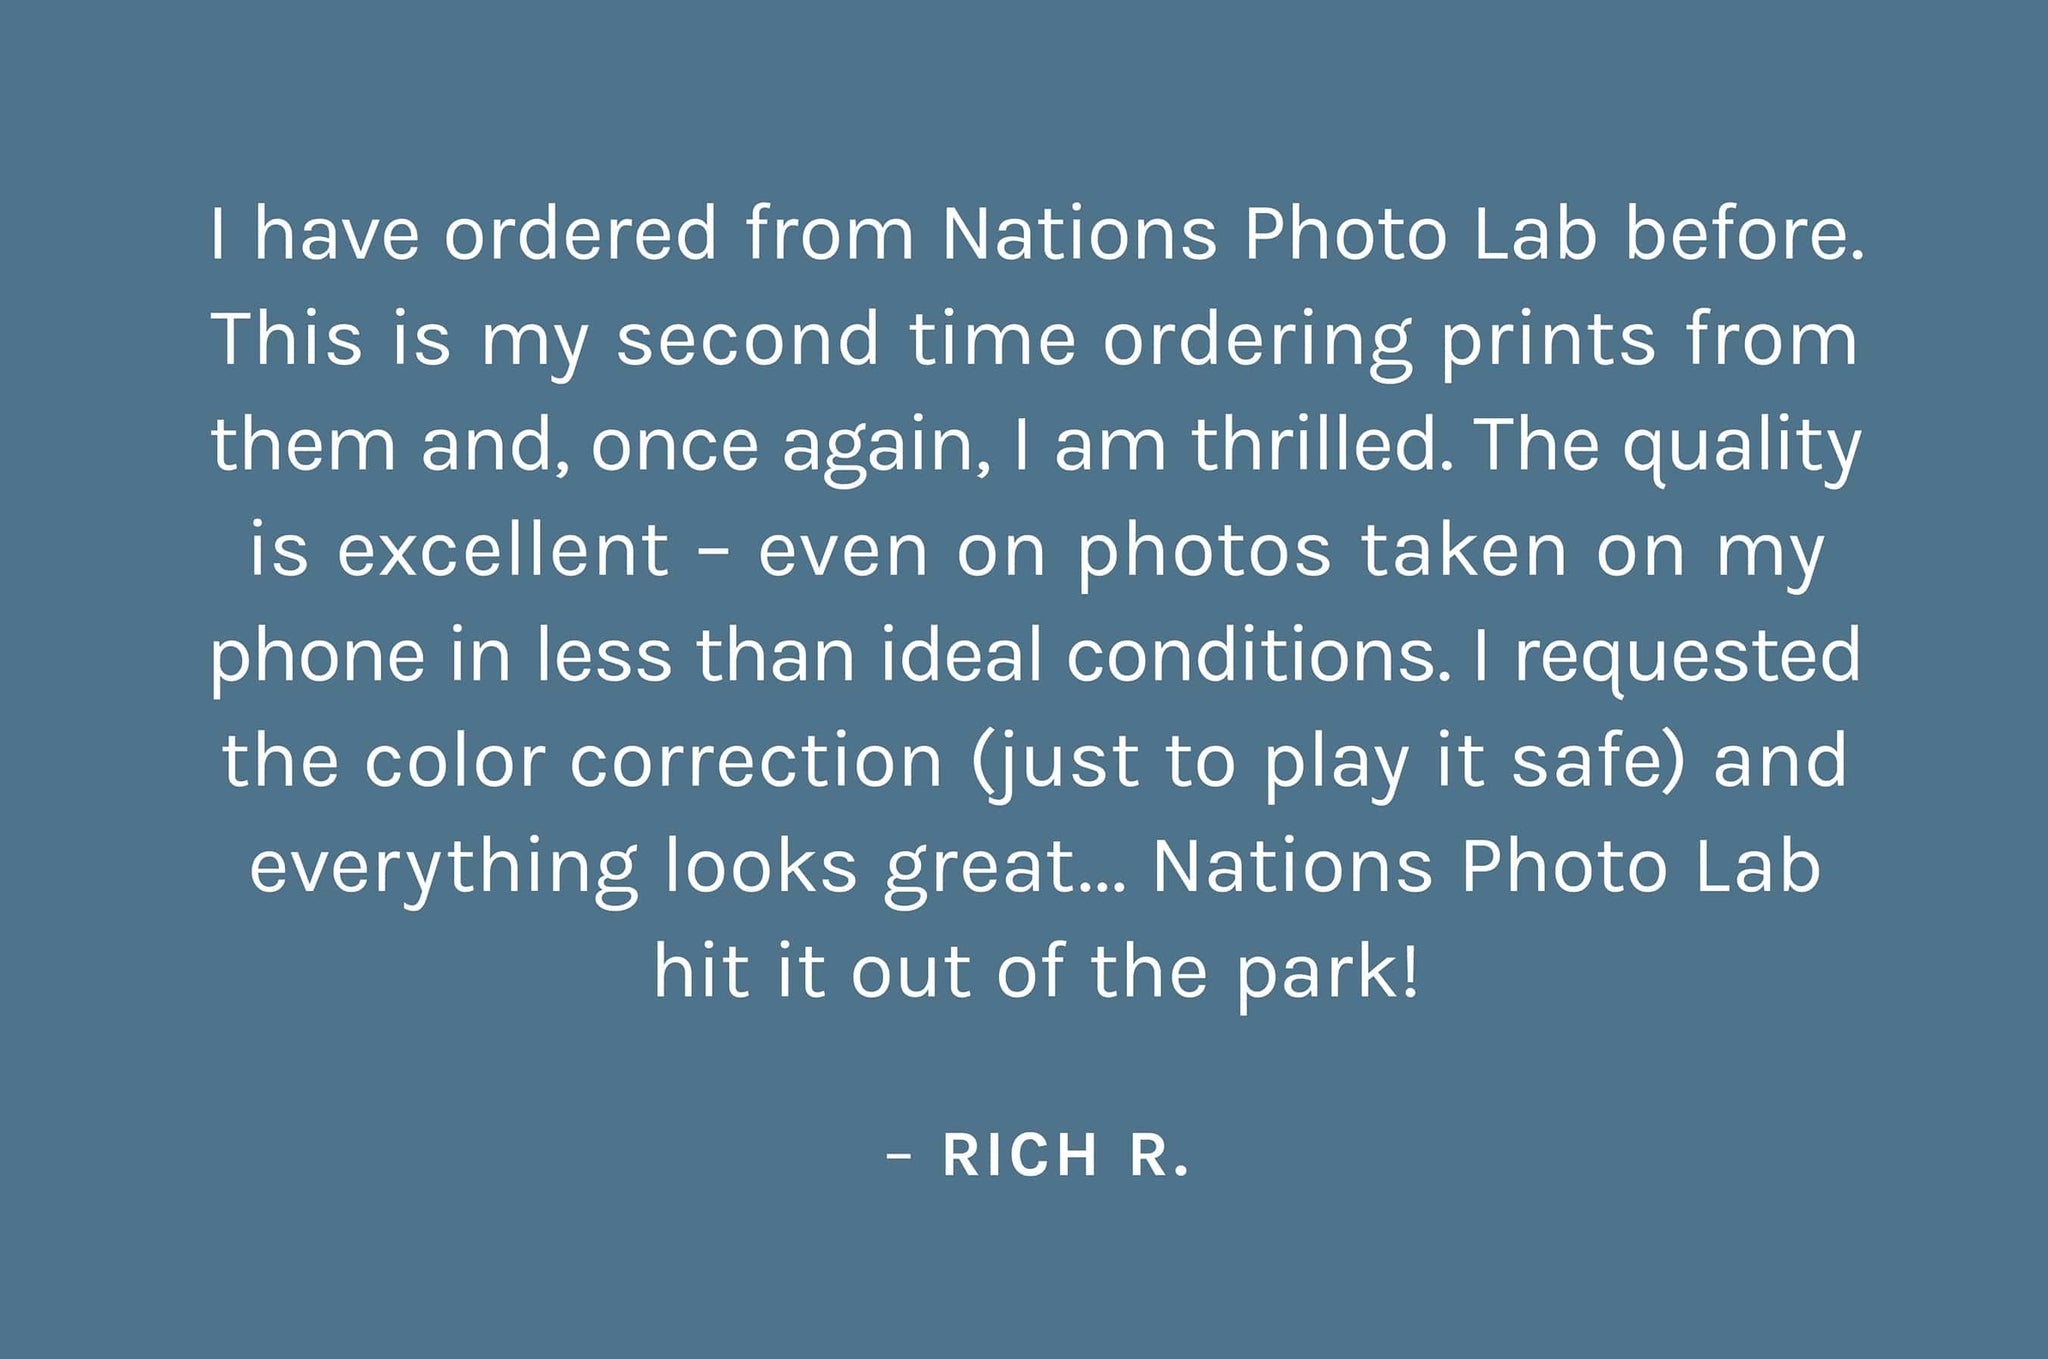 "I have ordered from Nations Photo Lab before.  This is my second time ordering prints from  them and, once again, I am thrilled. The quality  is excellent – even on photos taken on my  phone in less than ideal conditions. I requested  the color correction (just to play it safe) and everything looks great... Nations Photo Lab hit it out of the park!"    – Rich R.